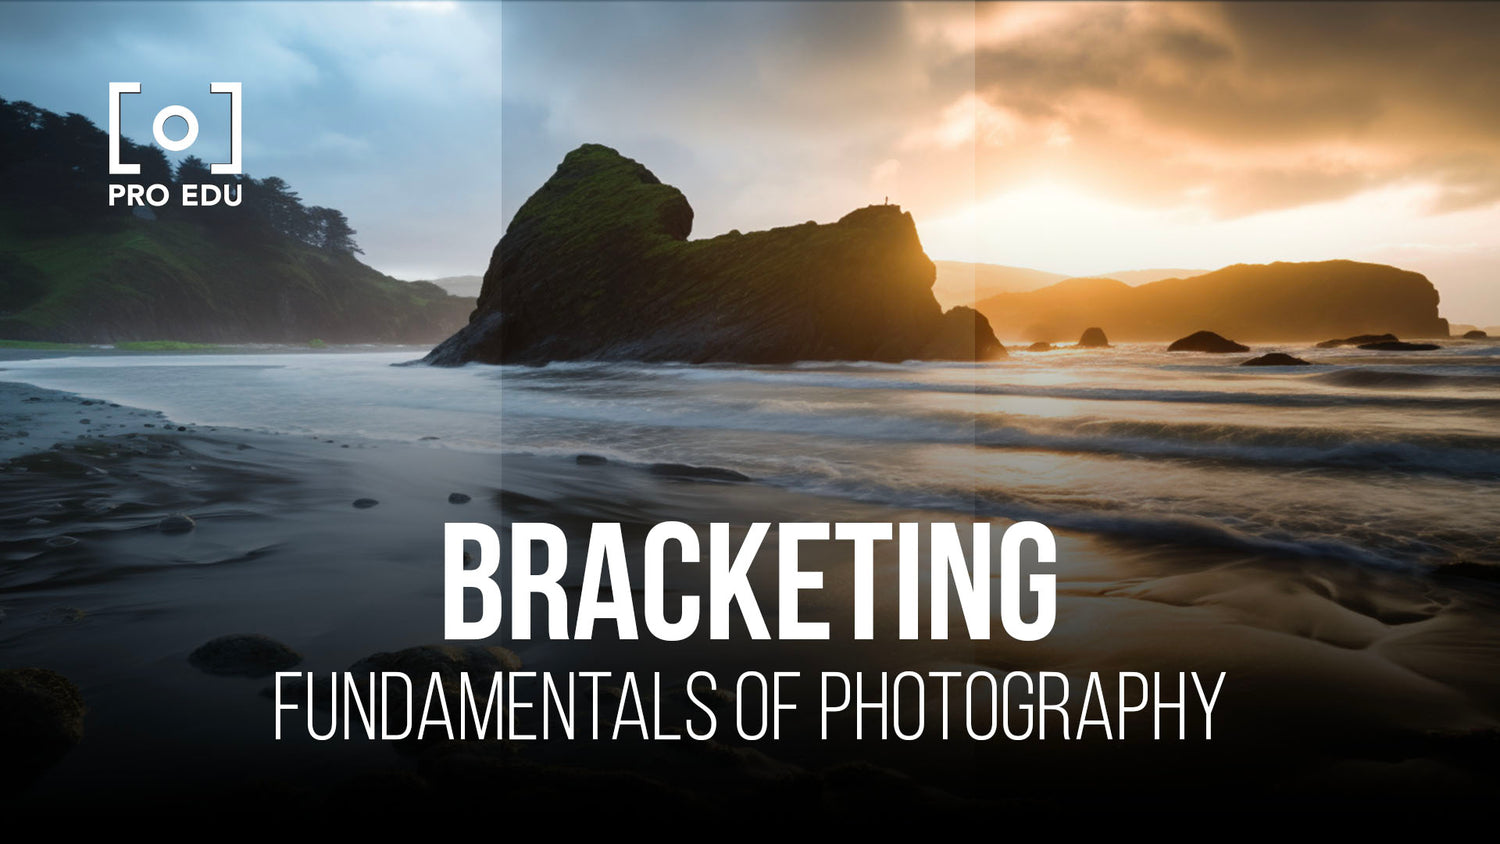 Maximizing dynamic range with bracketing techniques in photography for detailed images